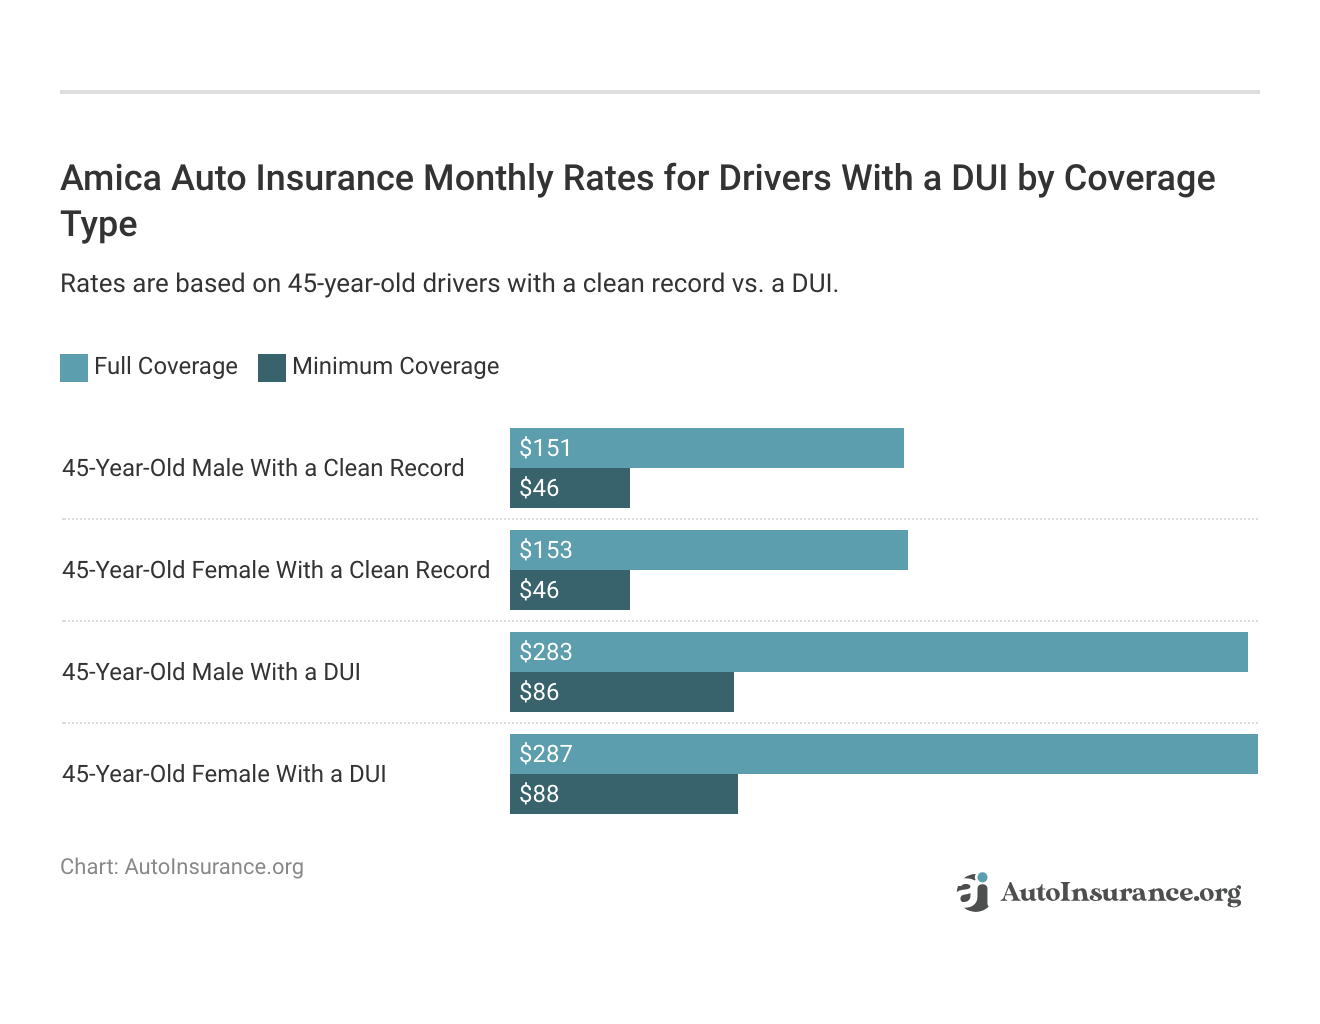 <h3>Amica Auto Insurance Monthly Rates for Drivers With a DUI by Coverage Type</h3>